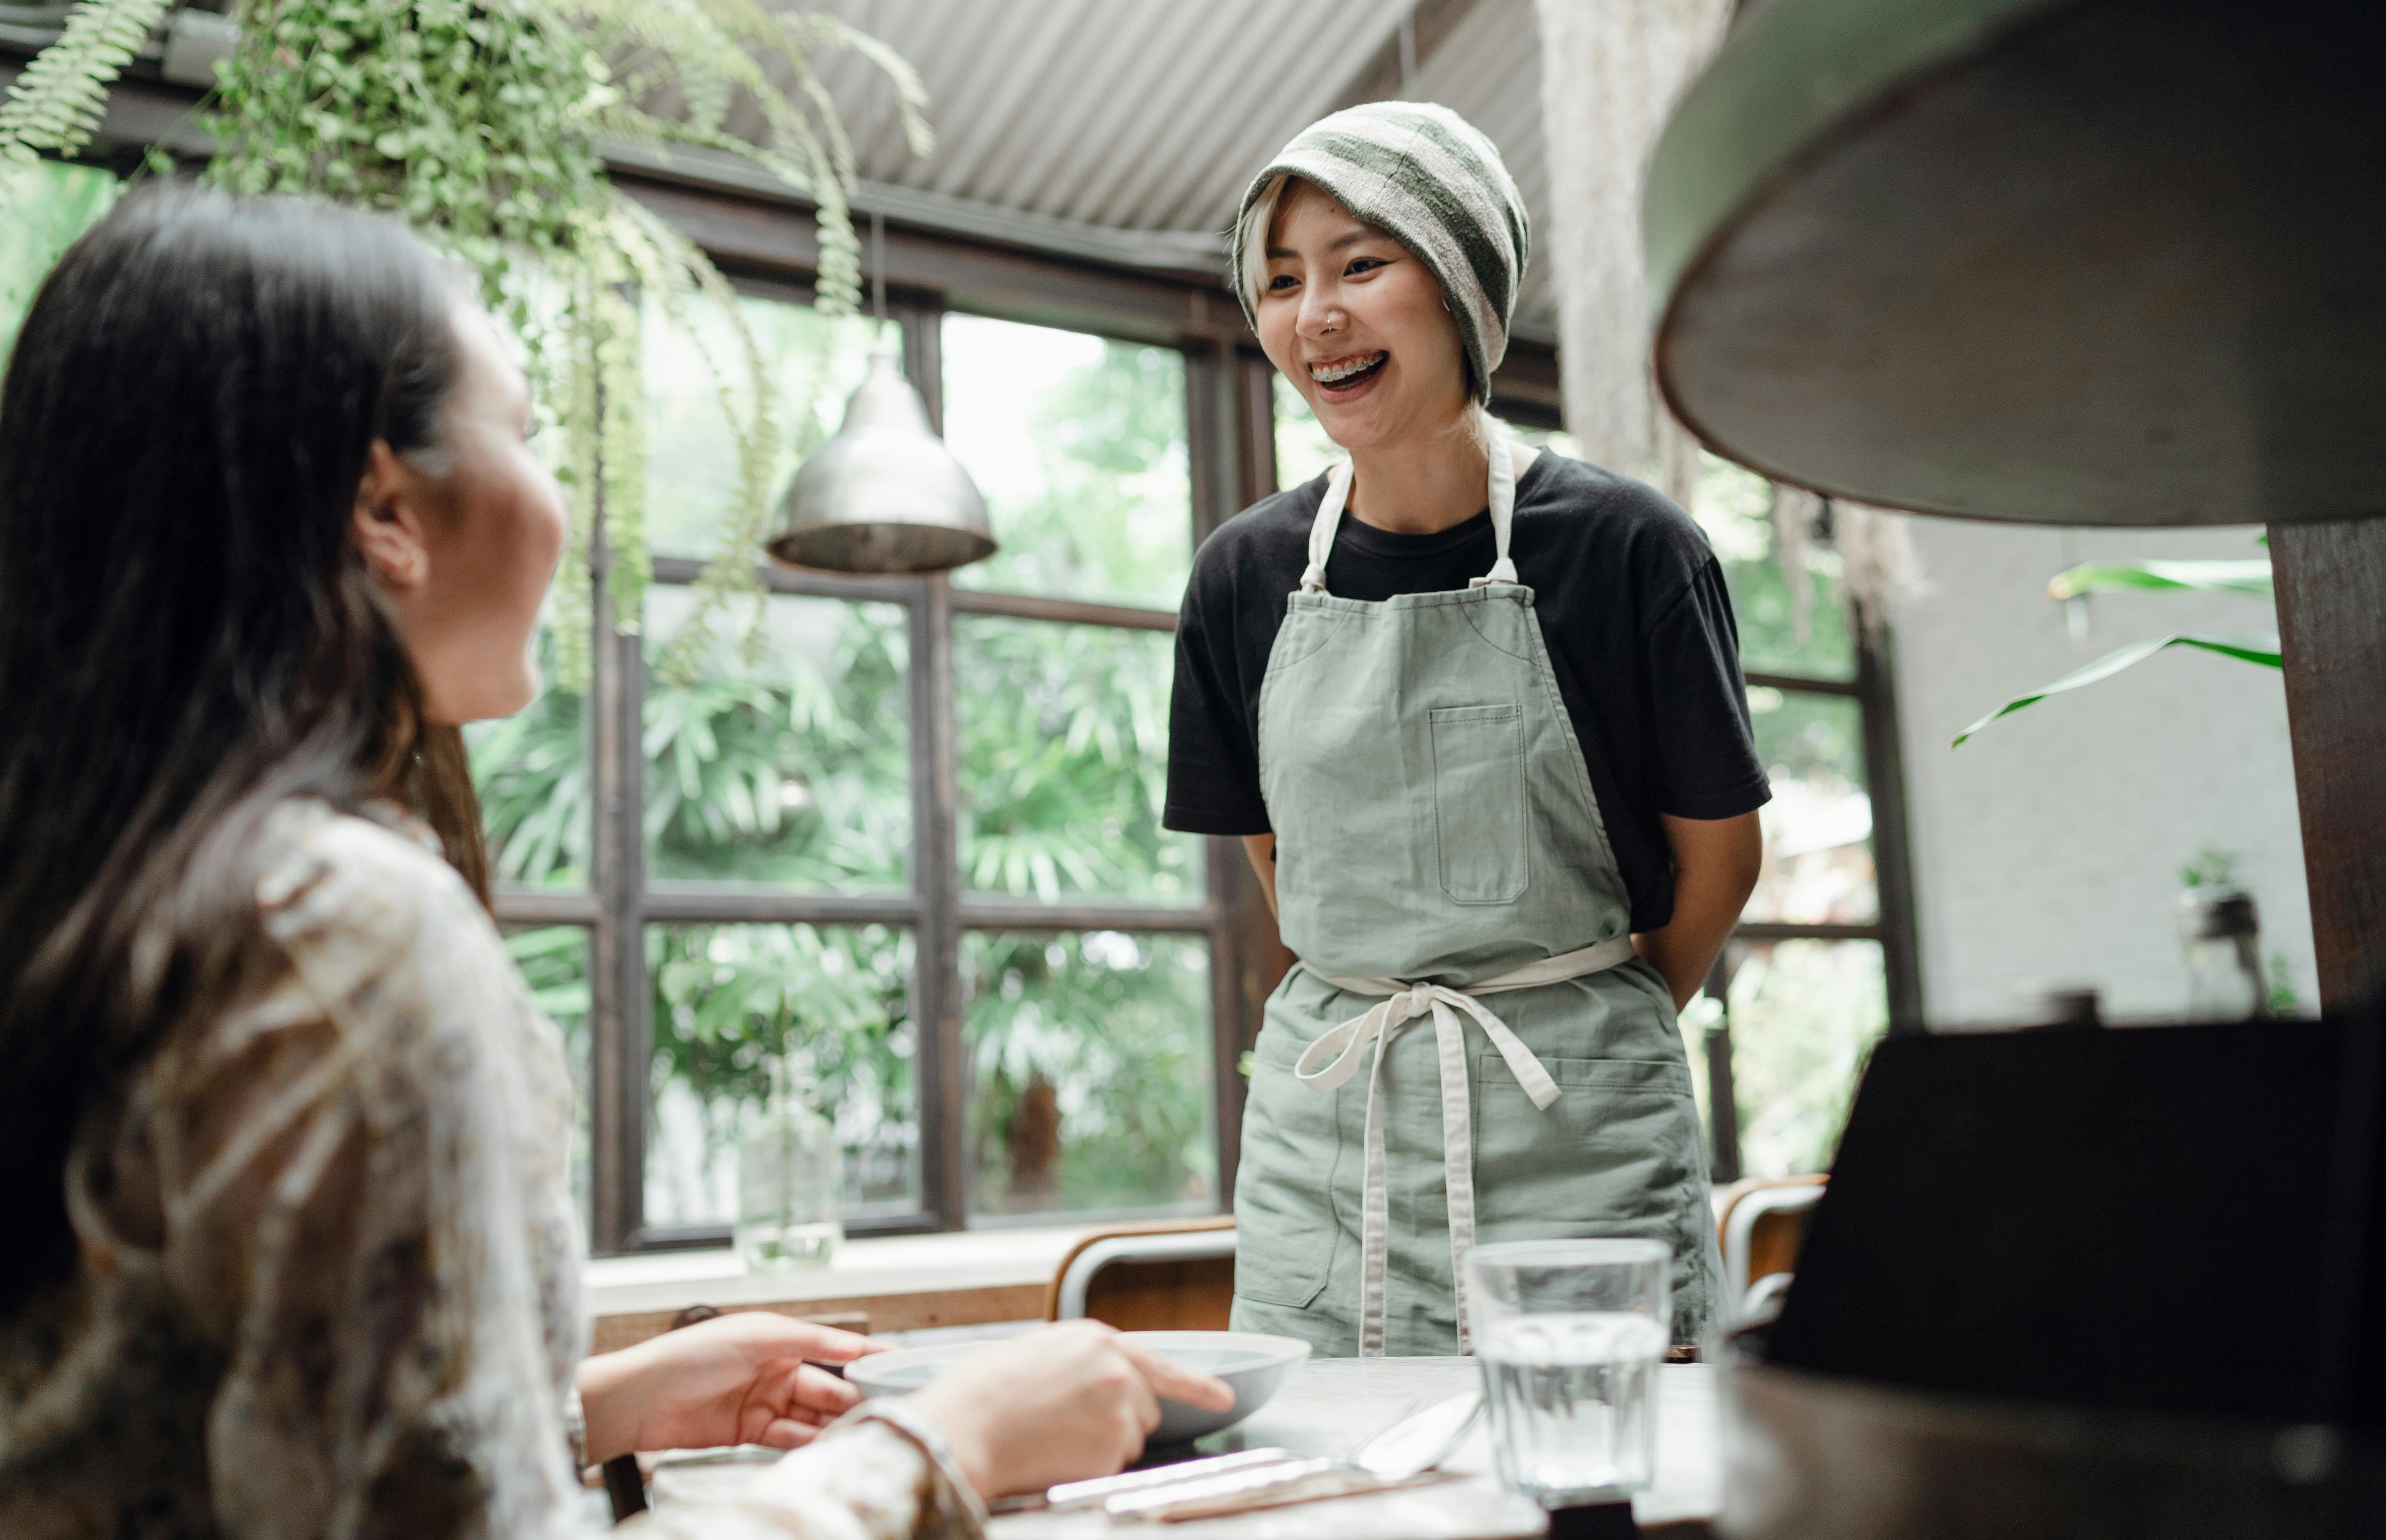 A waitress laughing | Source: Pexels